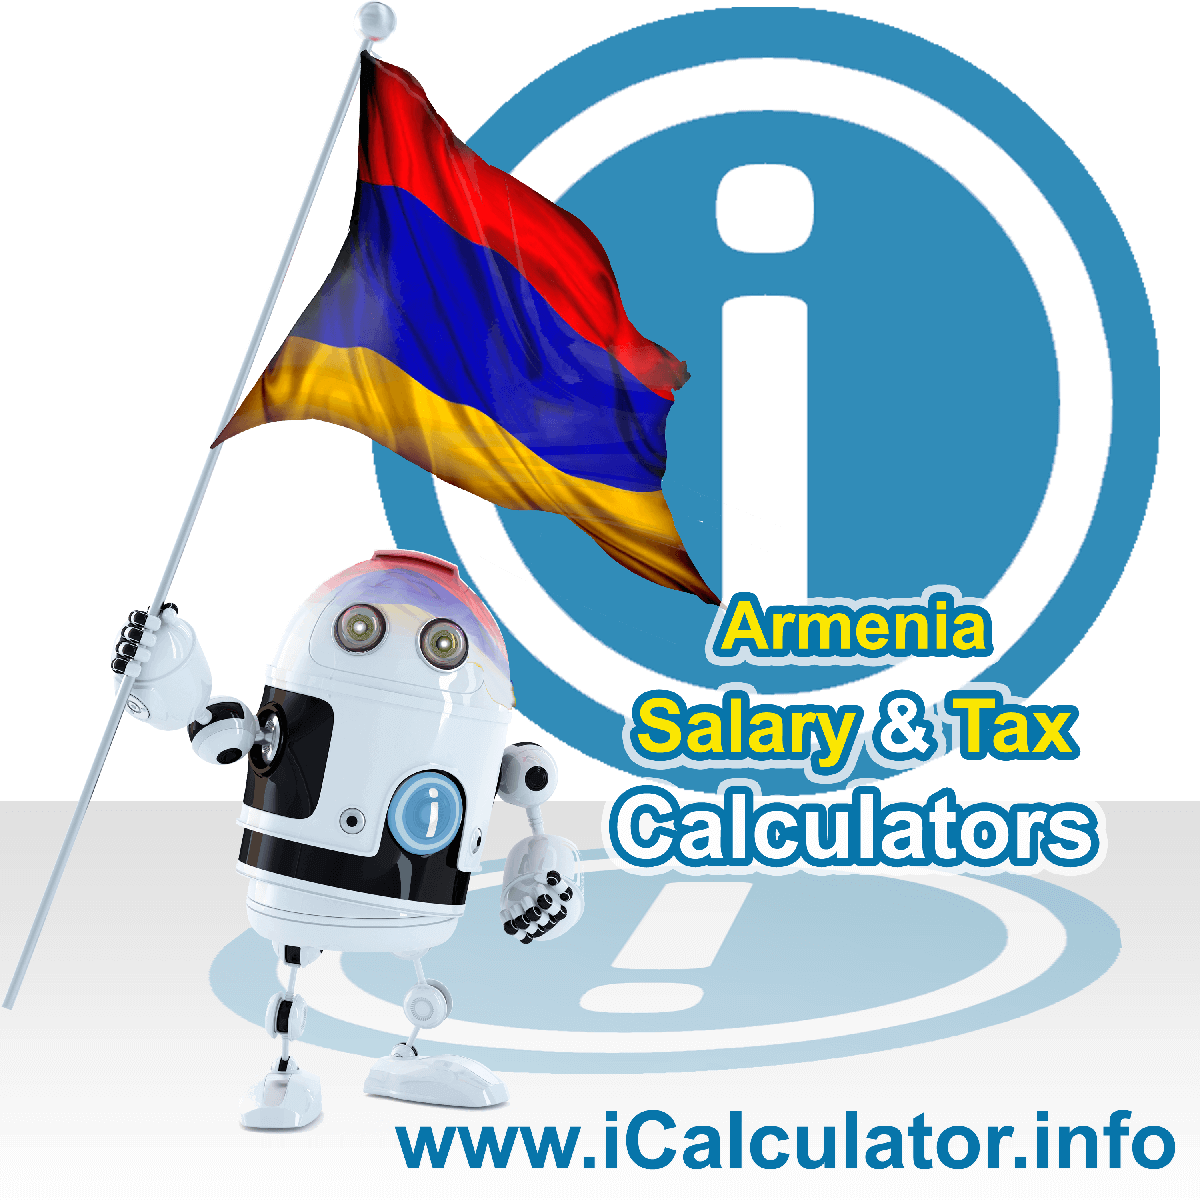 Armenia Tax Calculator. This image shows the Armenia flag and information relating to the tax formula for the Armenia Salary Calculator